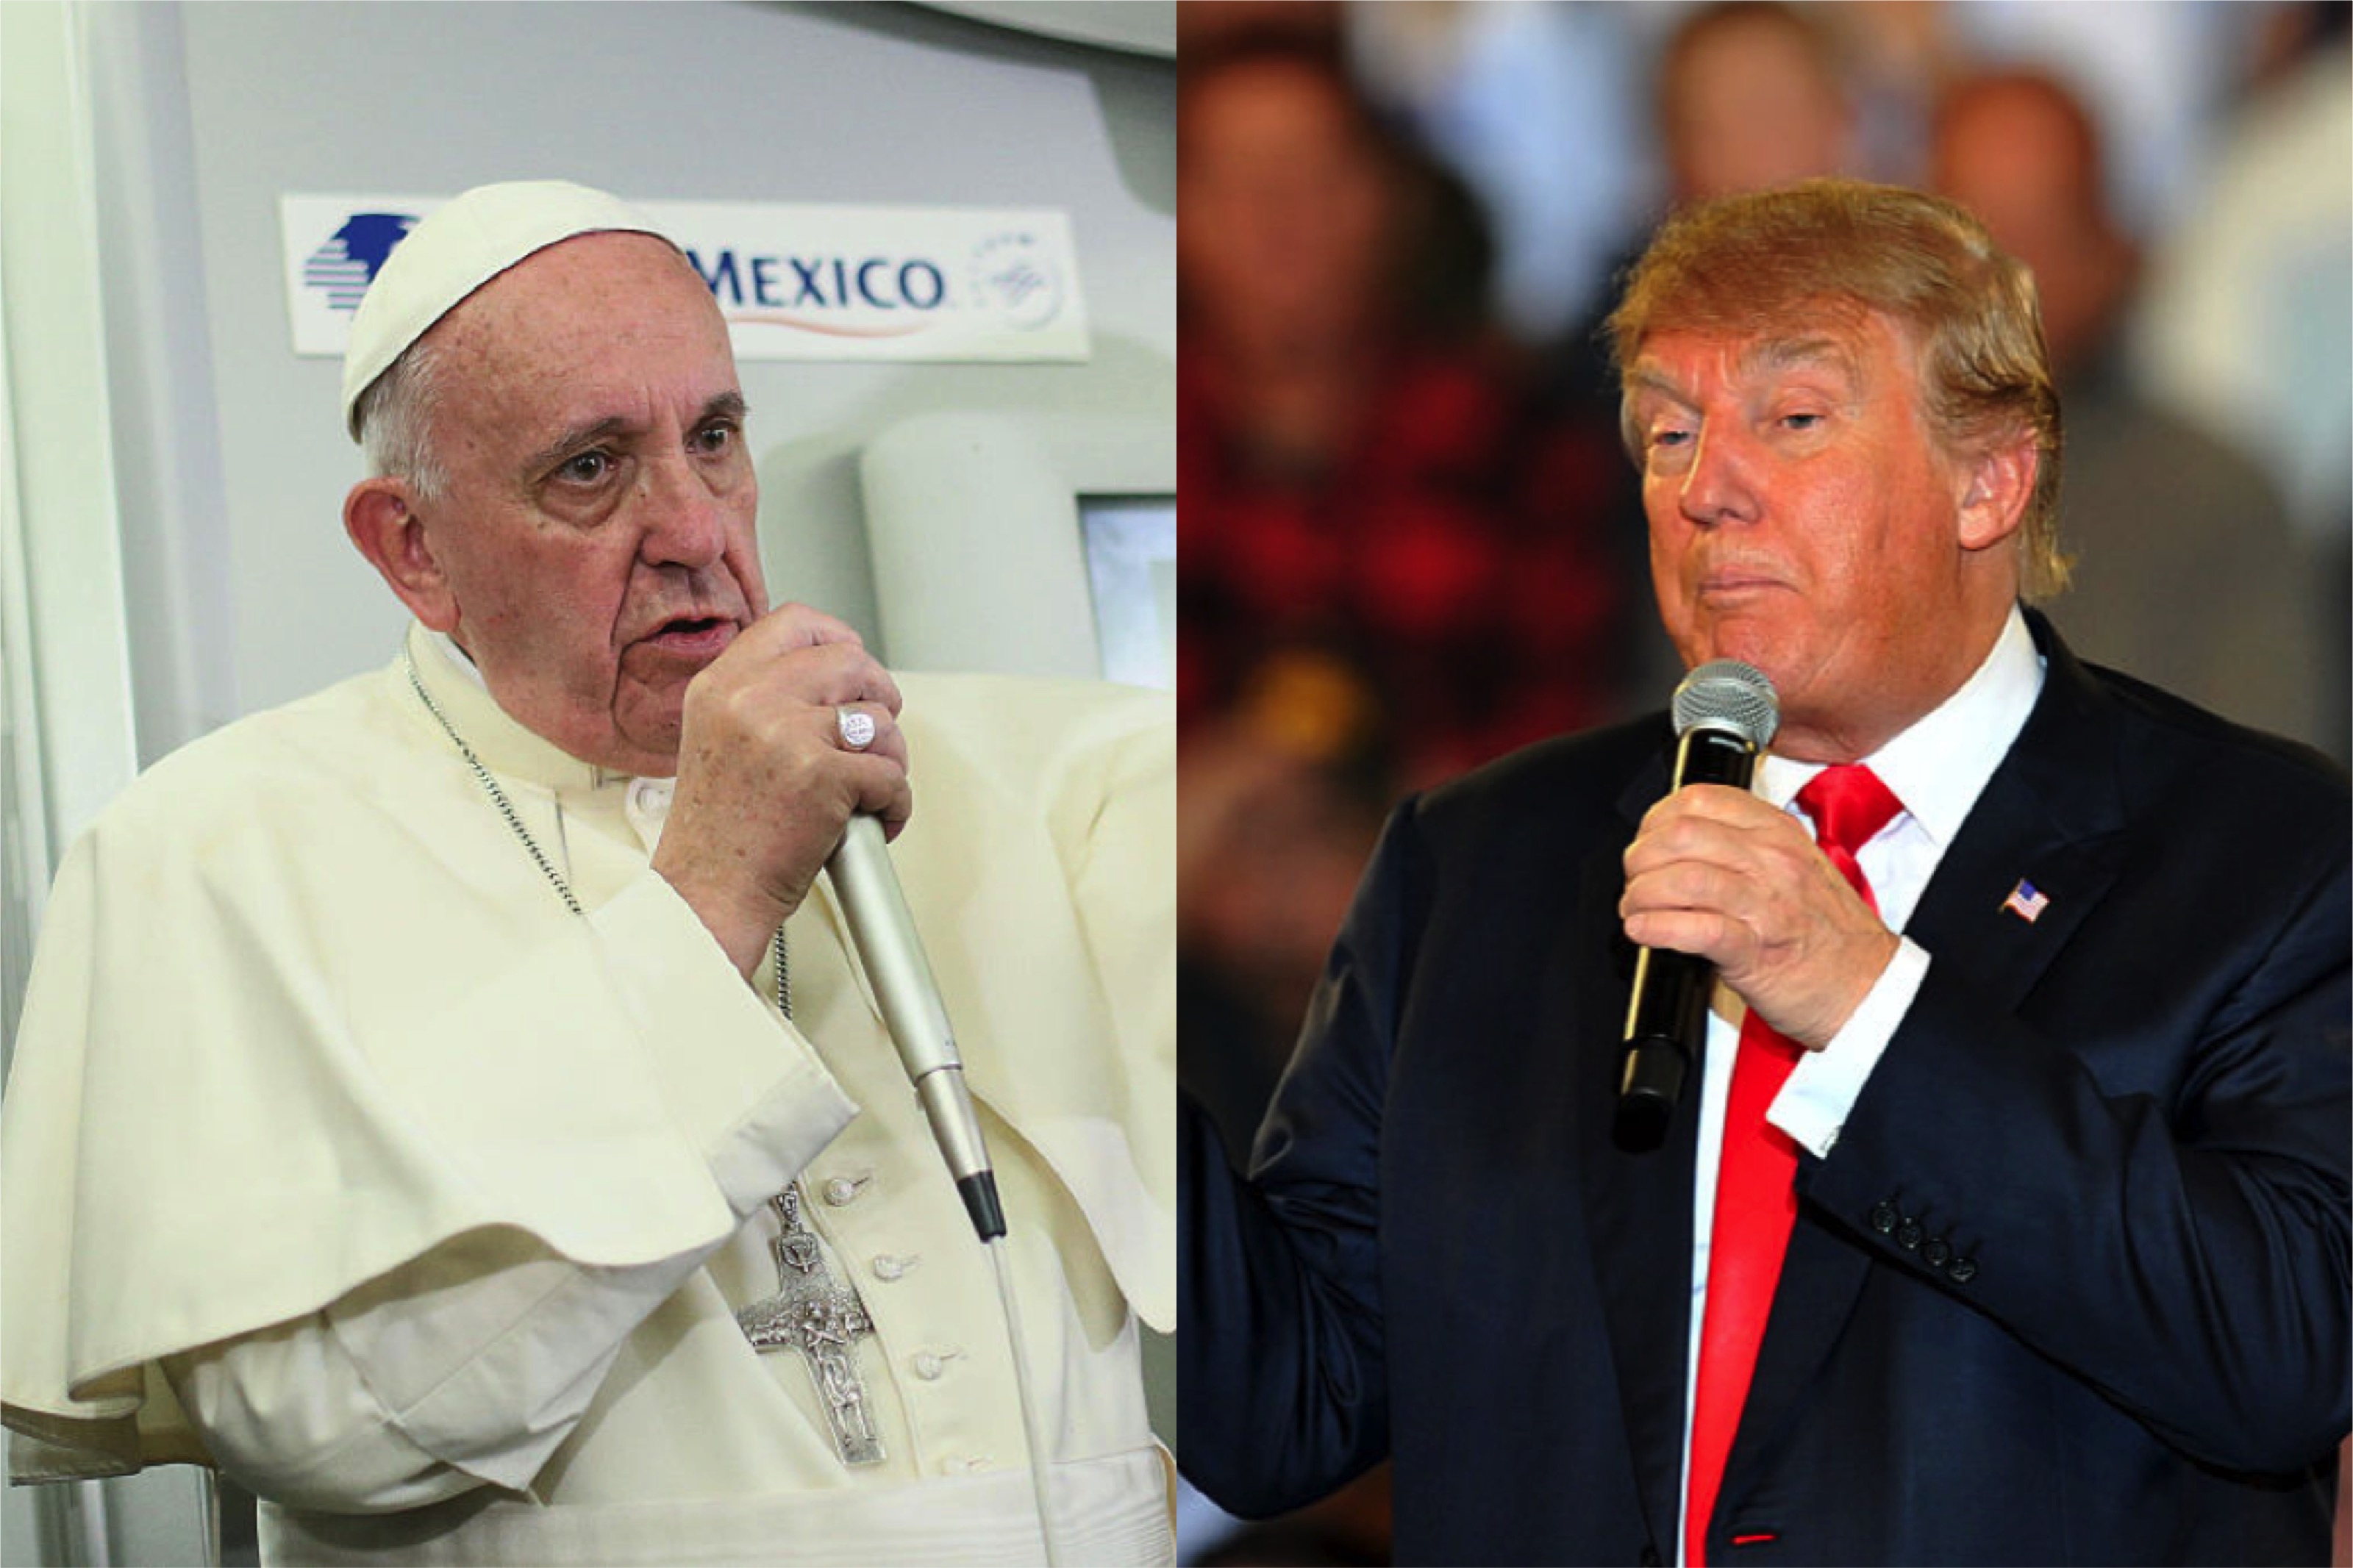 Pope Francis and Donald trump argue over the gospels